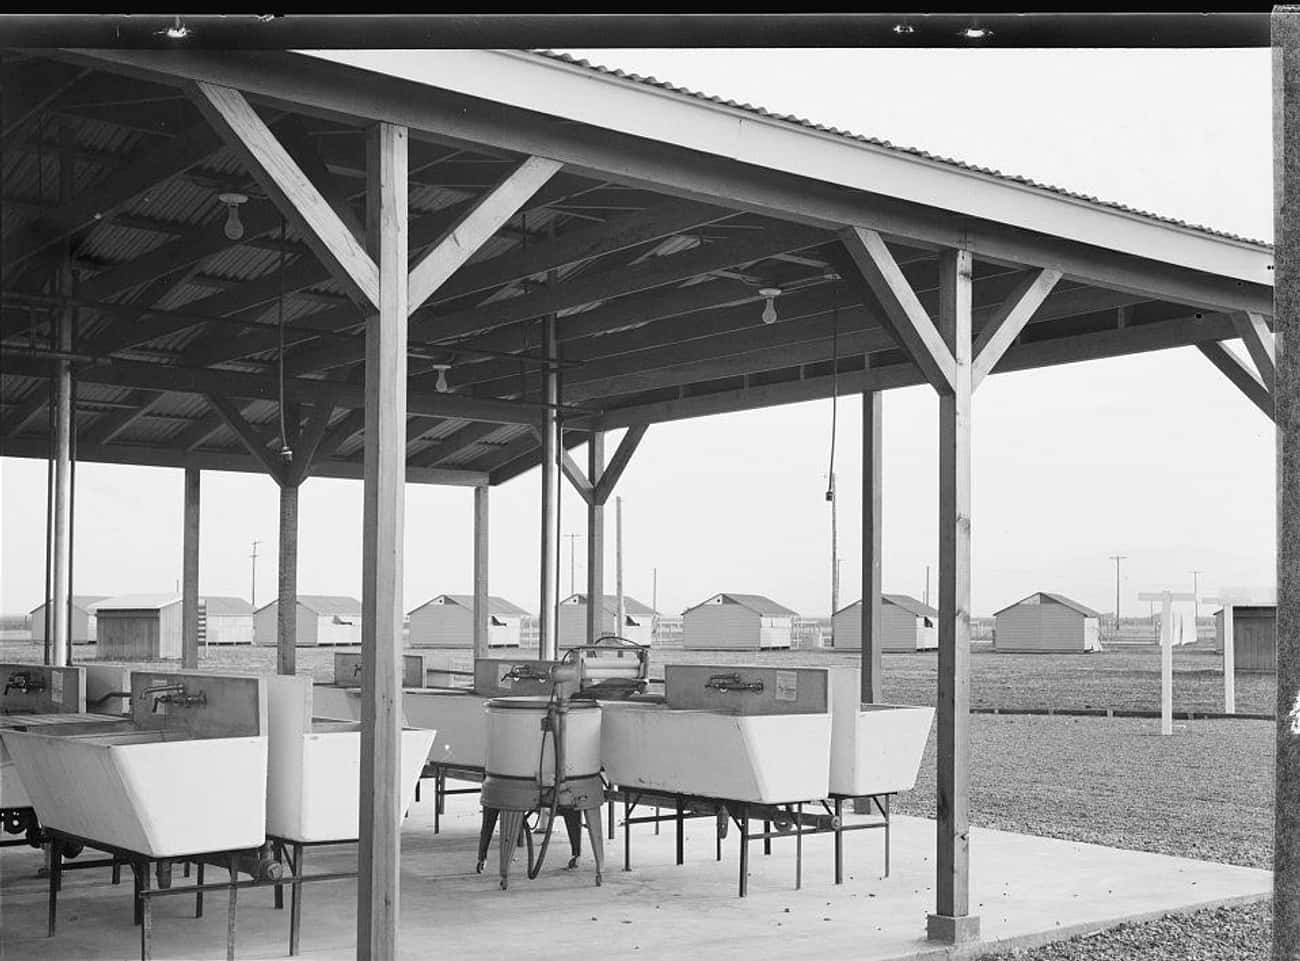 Laundry Facilities At A Camp In The San Joaquin Valley, CA, 1939 